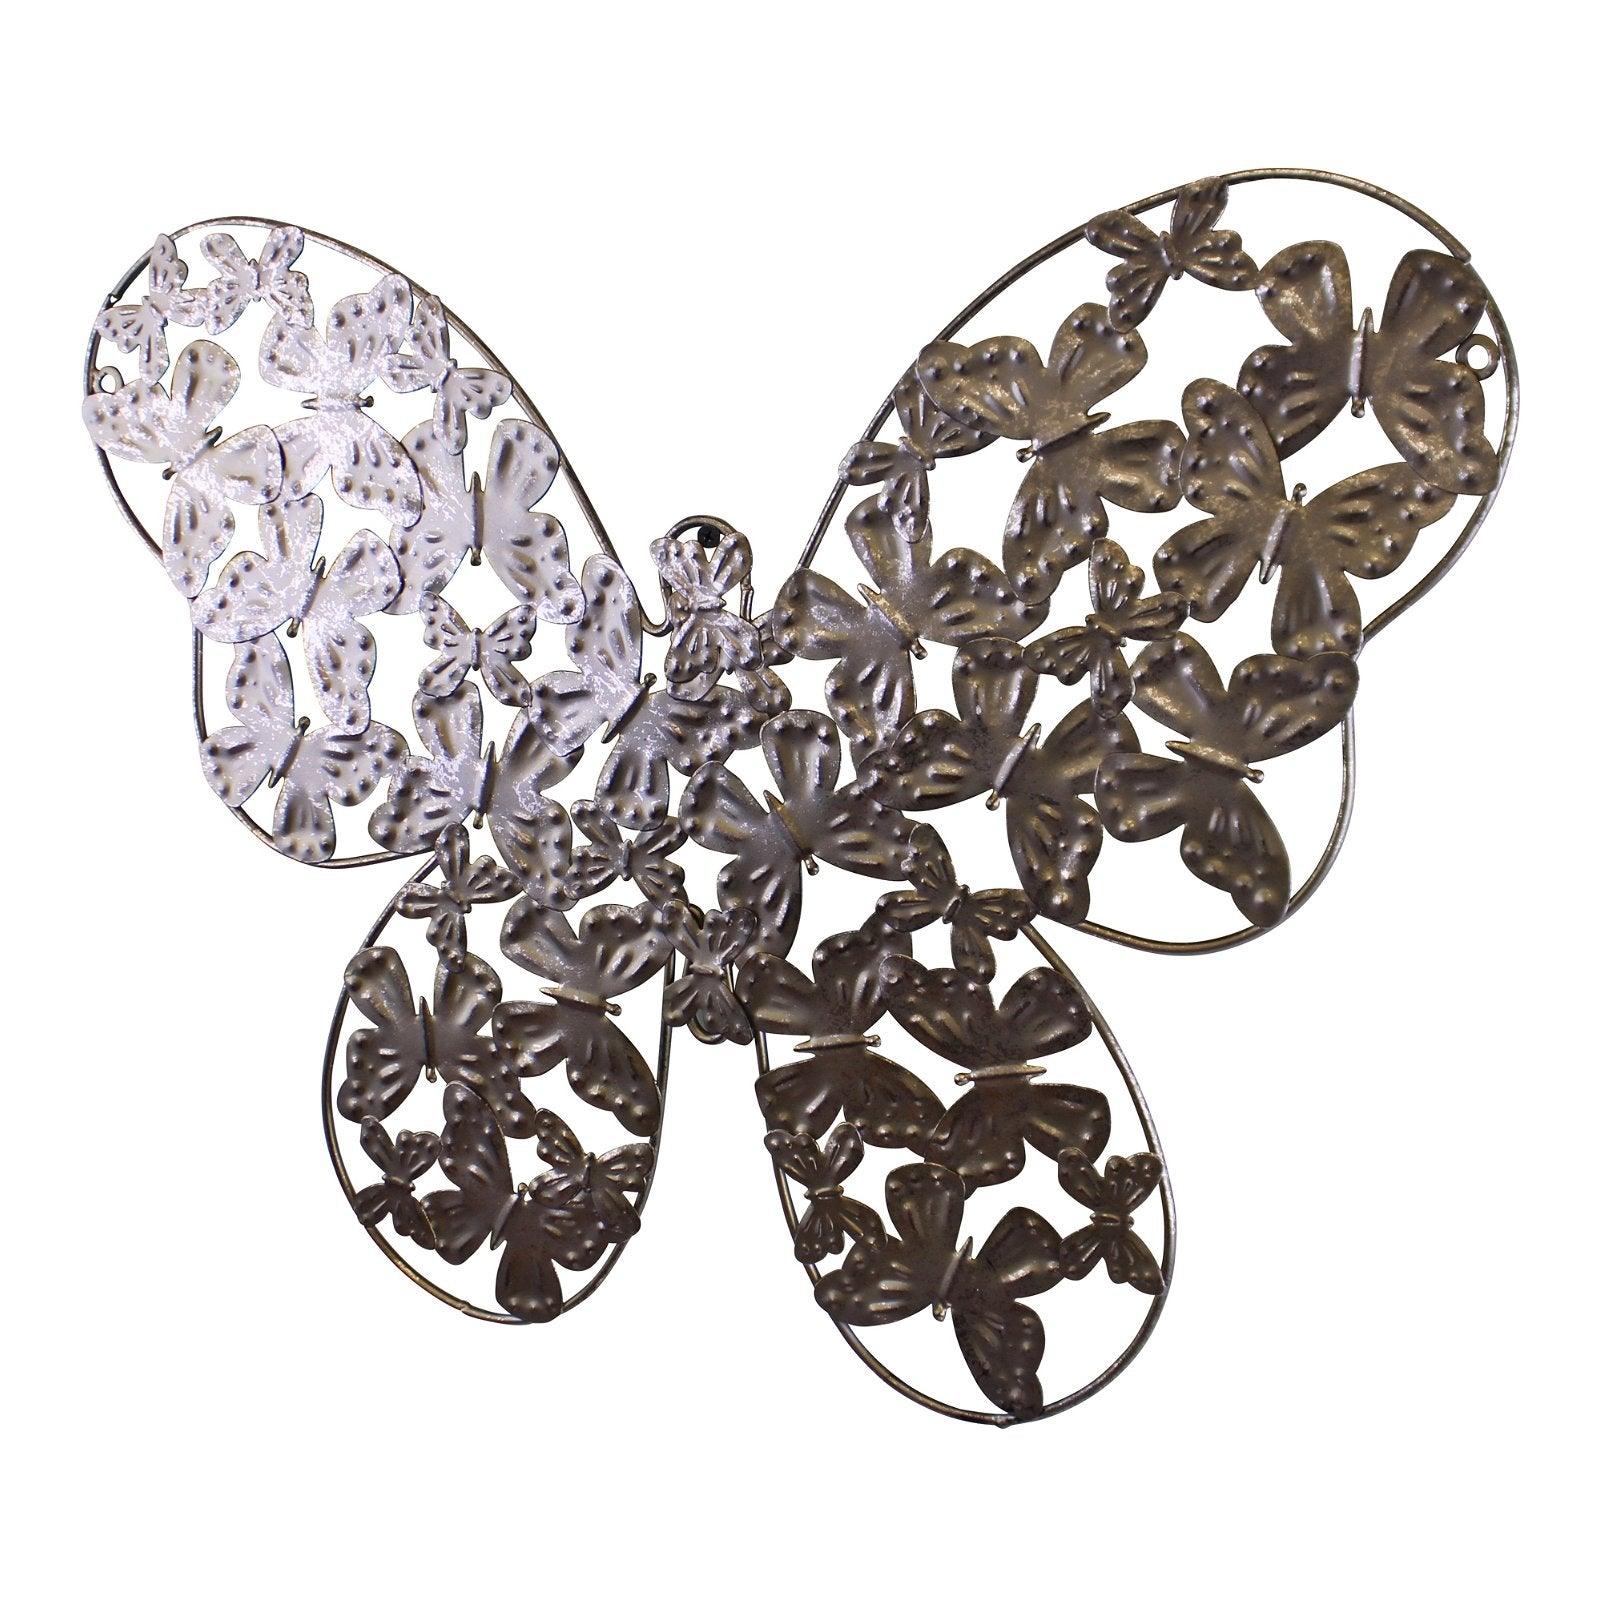 View Large Silver Metal Butterfly Design Wall Decor information